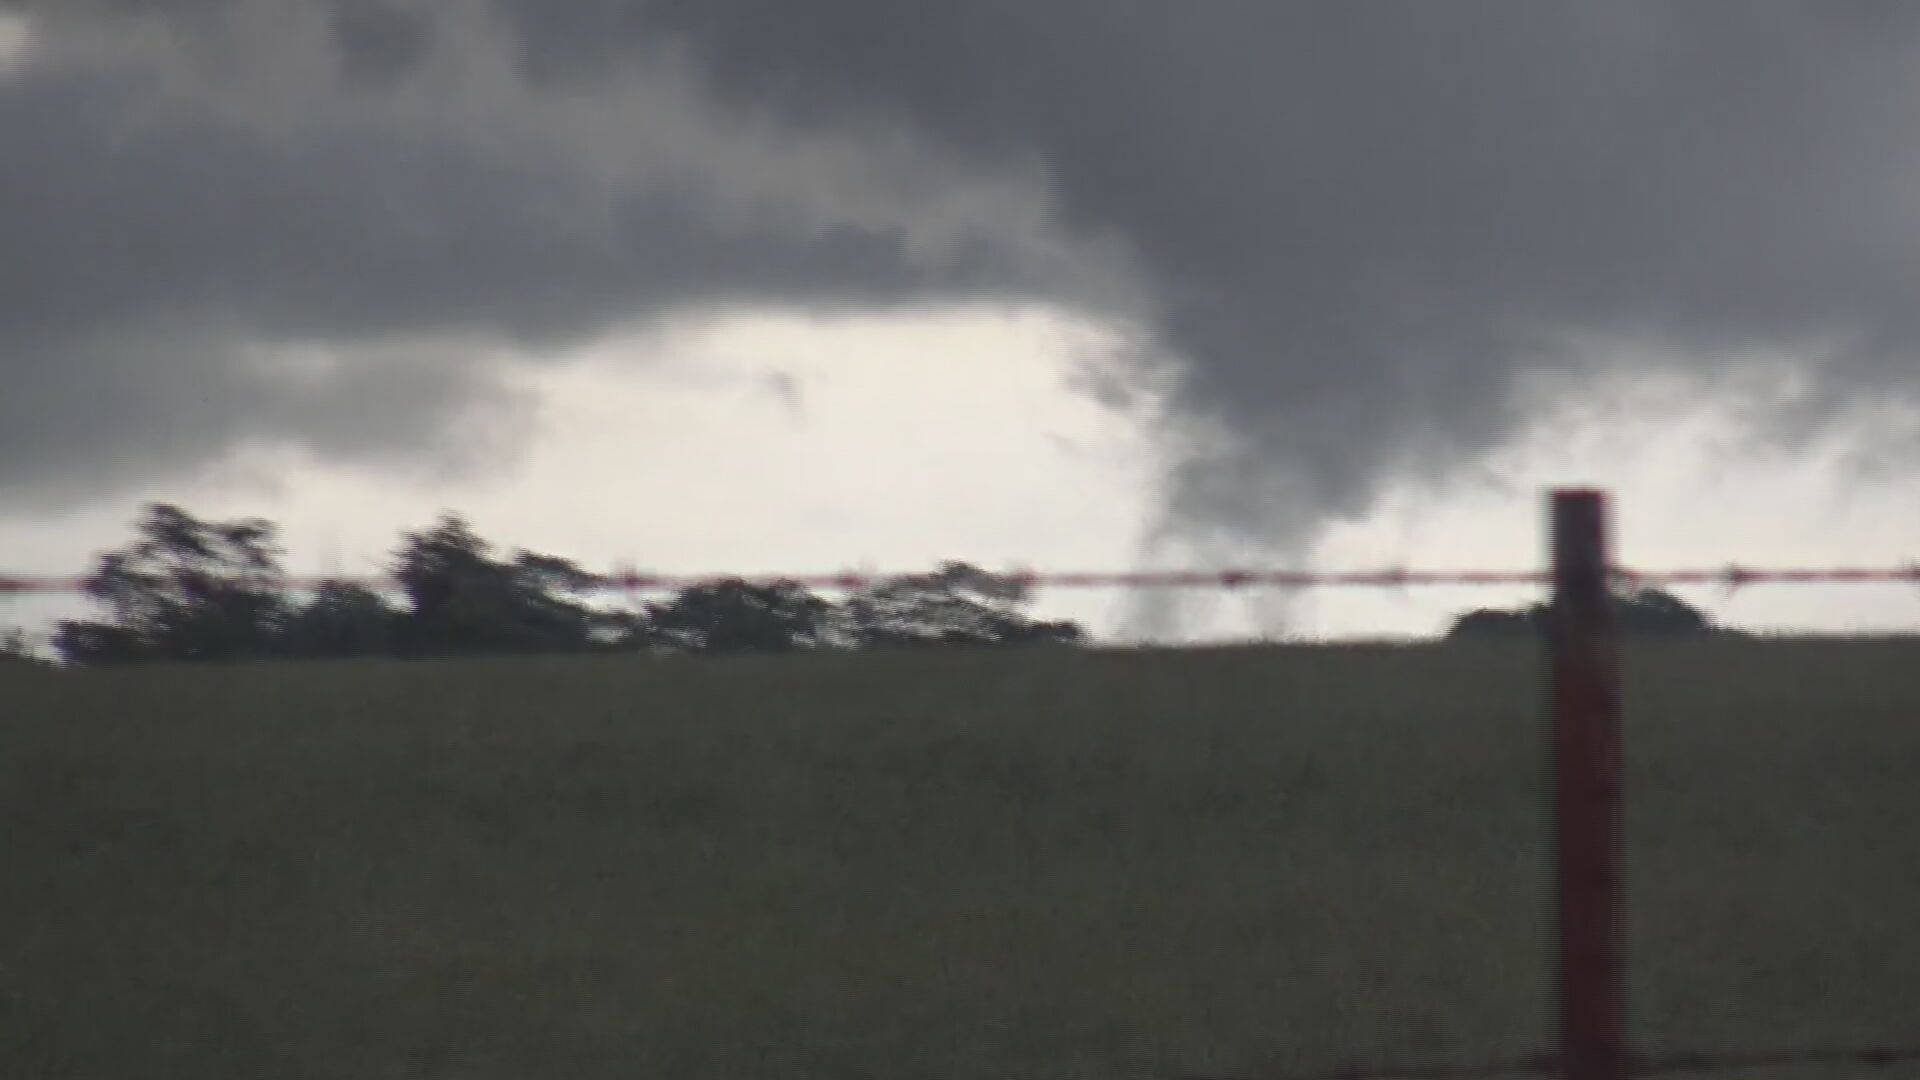 WATCH: Tornado Touches Down Northwest Of Siloam Springs